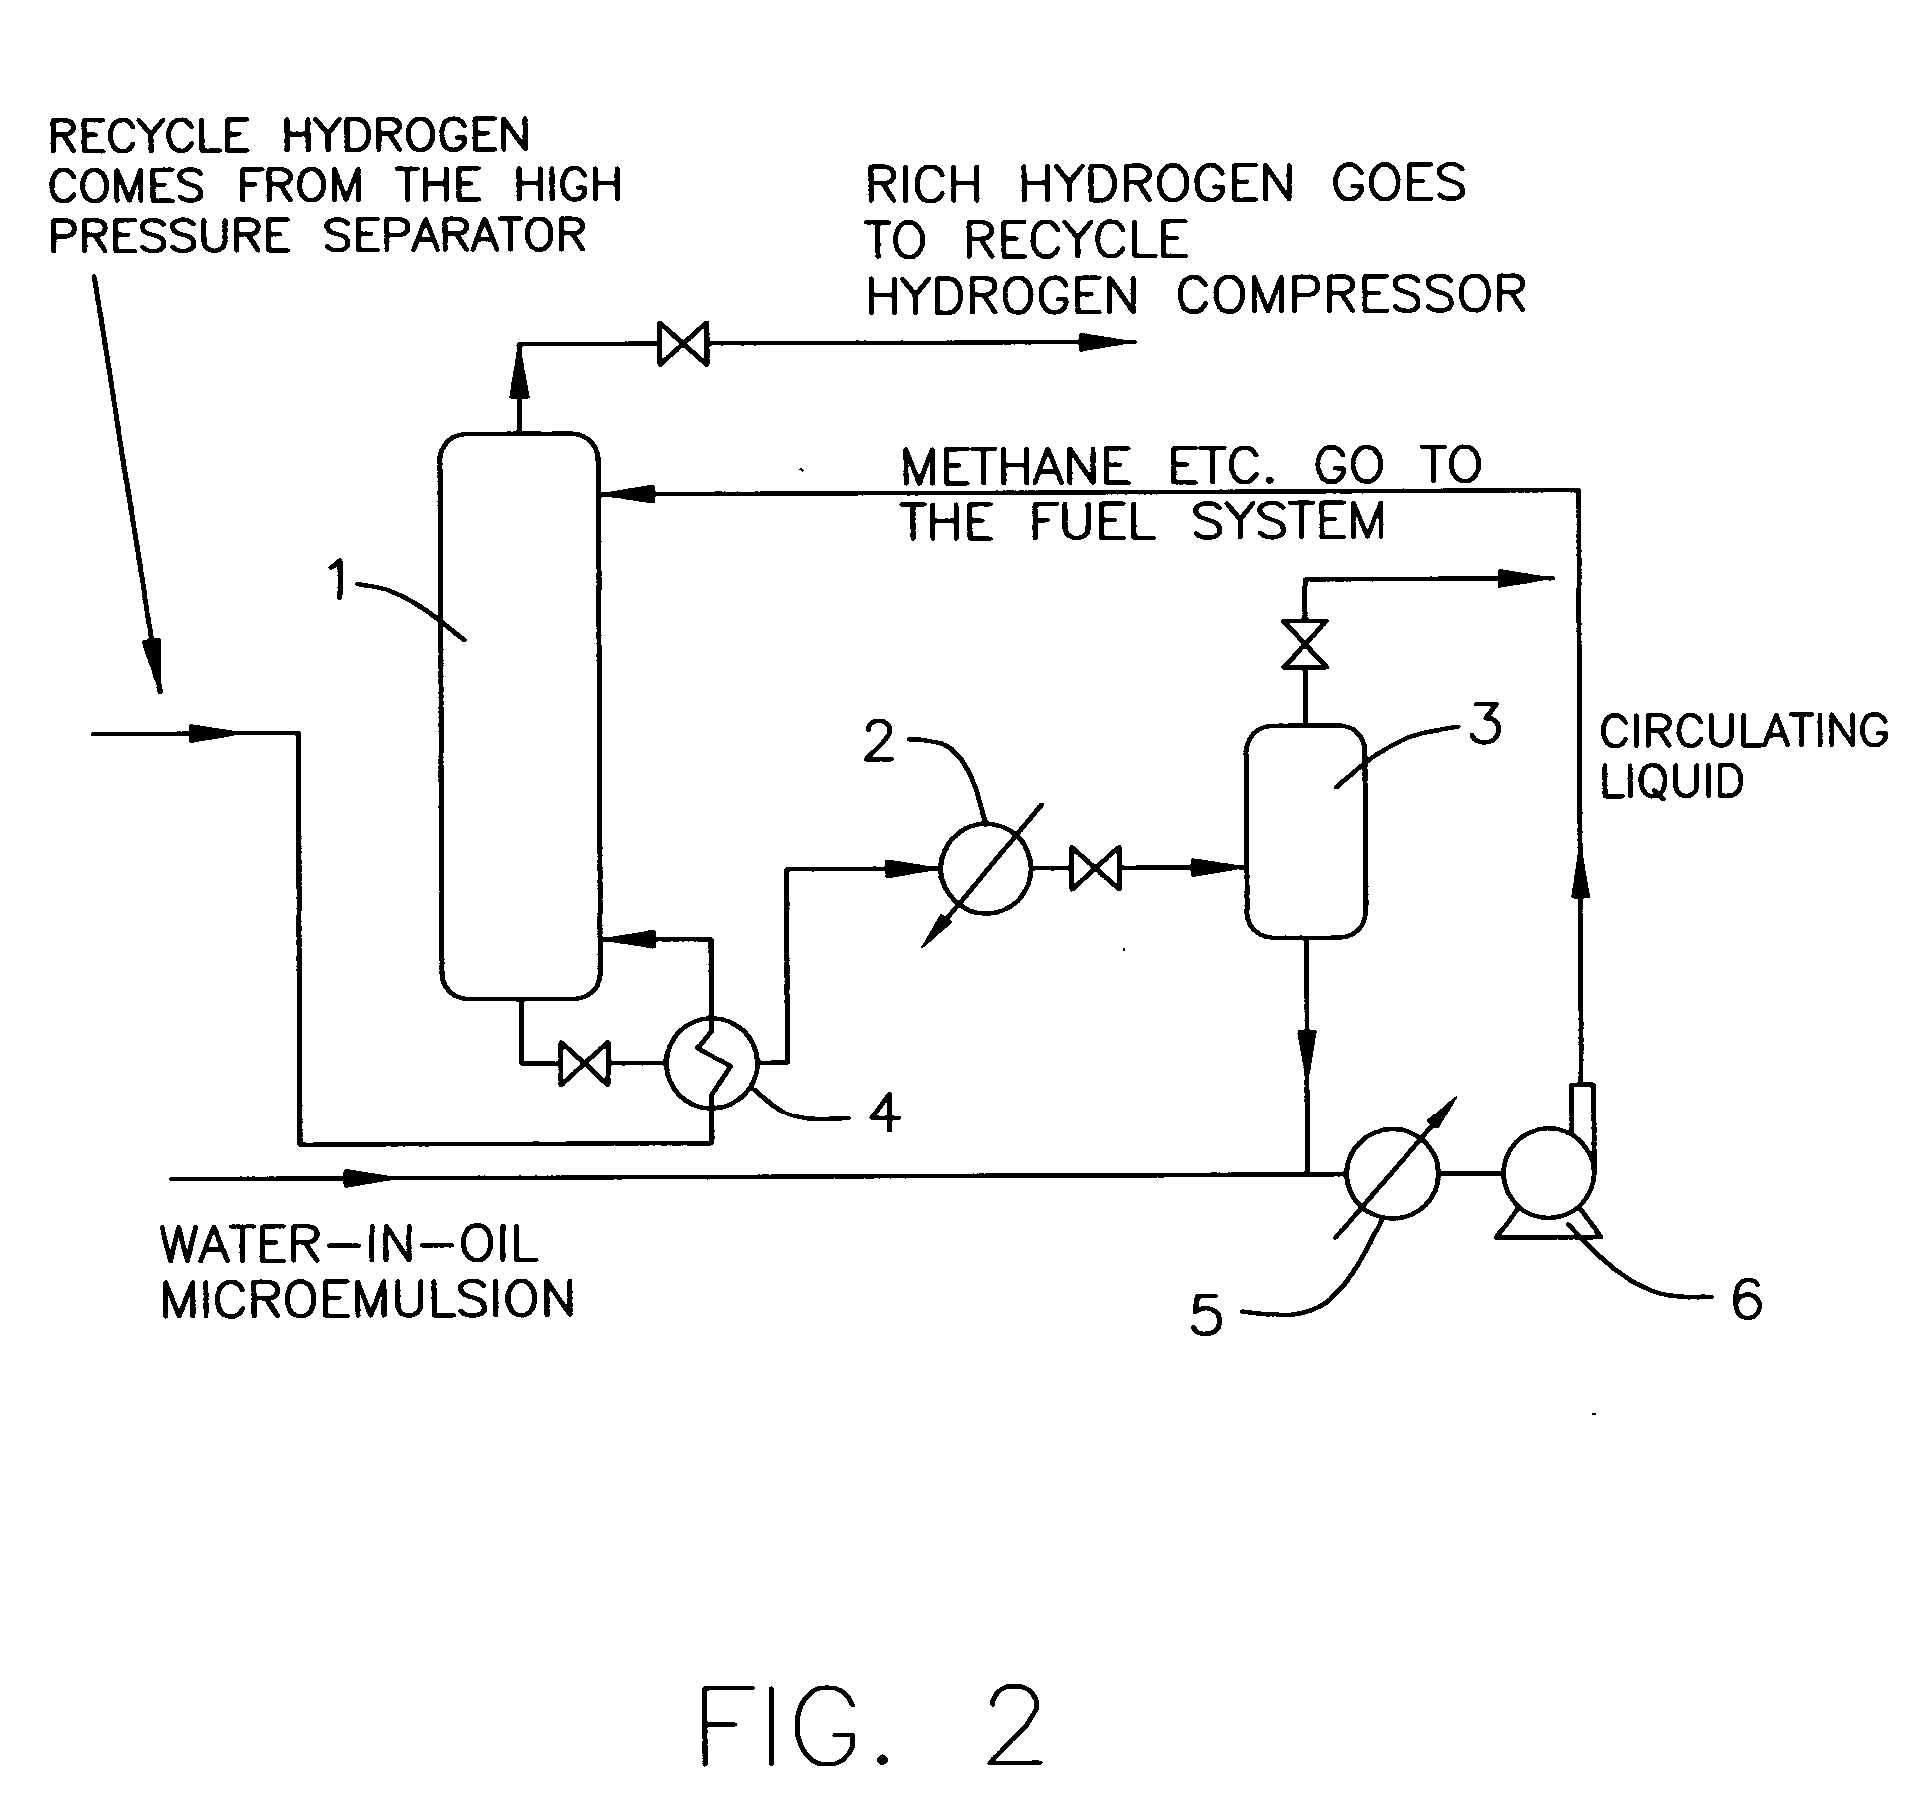 Apparatus and method for increasing the concentration of recycled hydrogen in a high pressure hydrogenation reactor